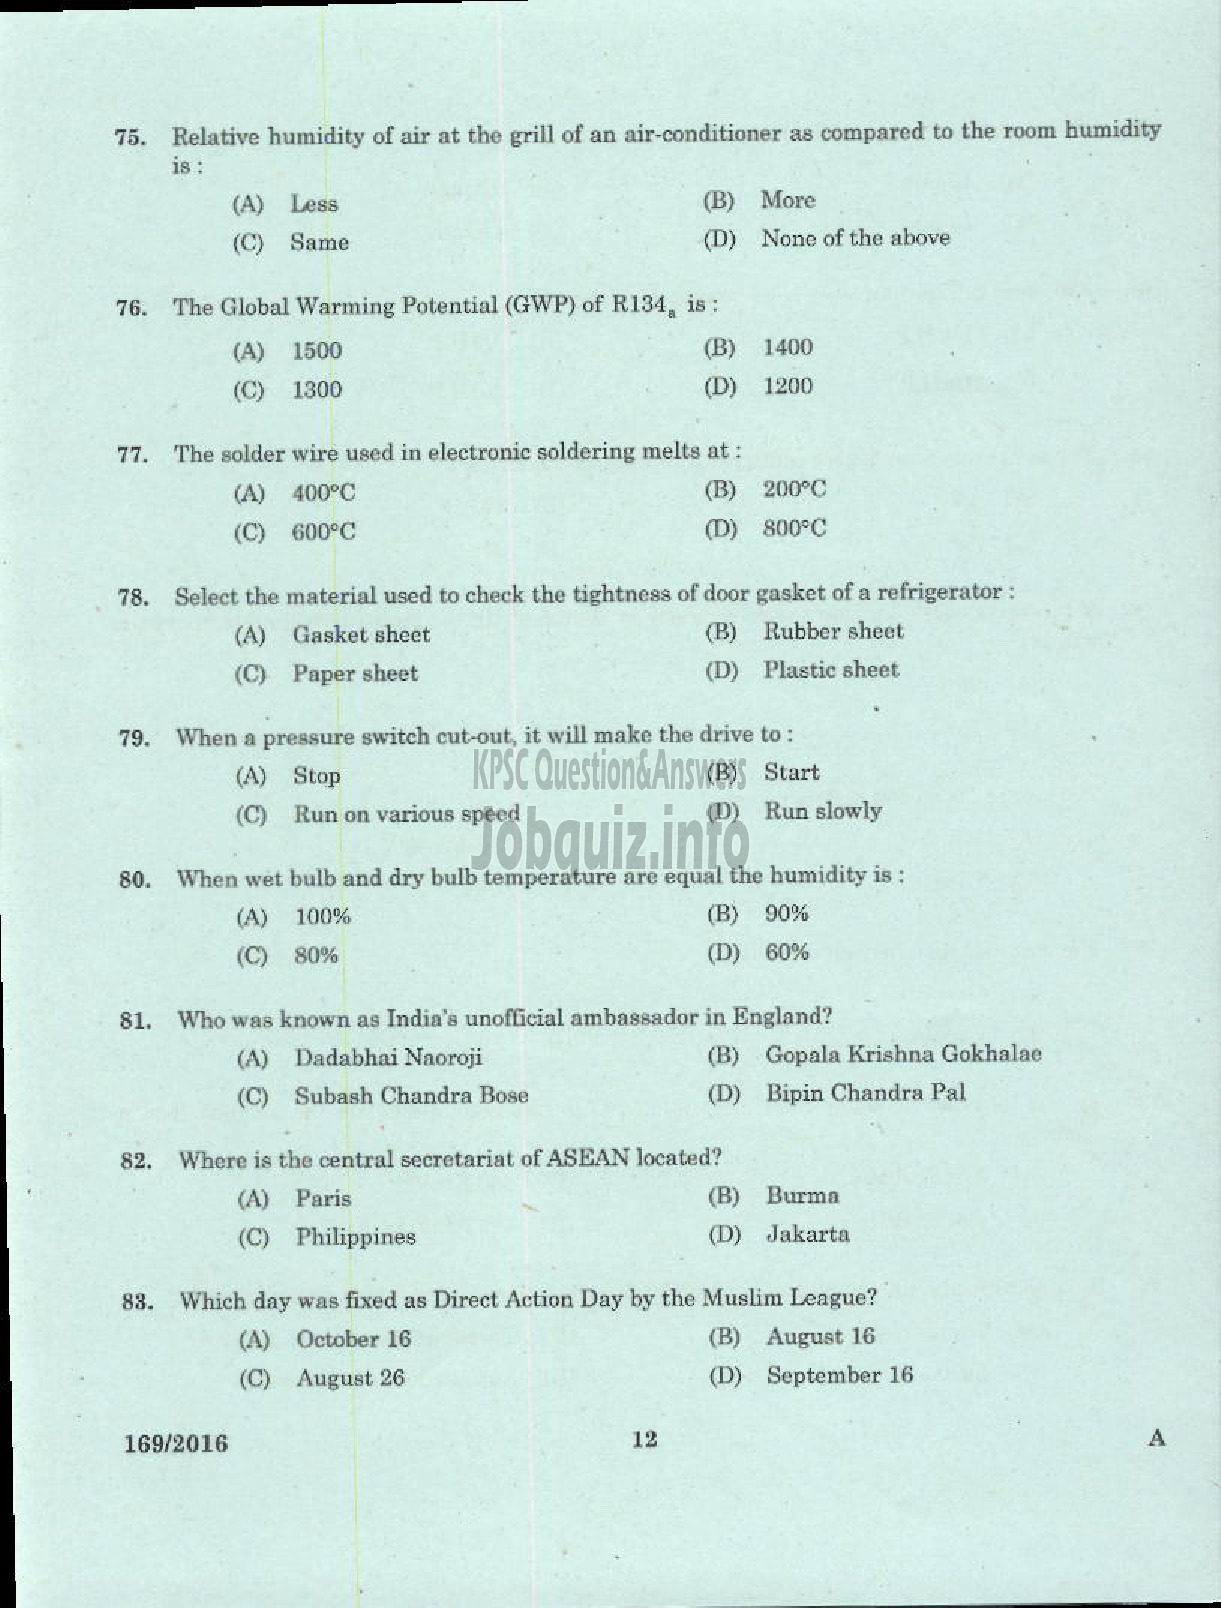 Kerala PSC Question Paper - TRADESMAN REFRIGERATION AND AIR CONDITIONING TECHNICAL EDUCATION-10